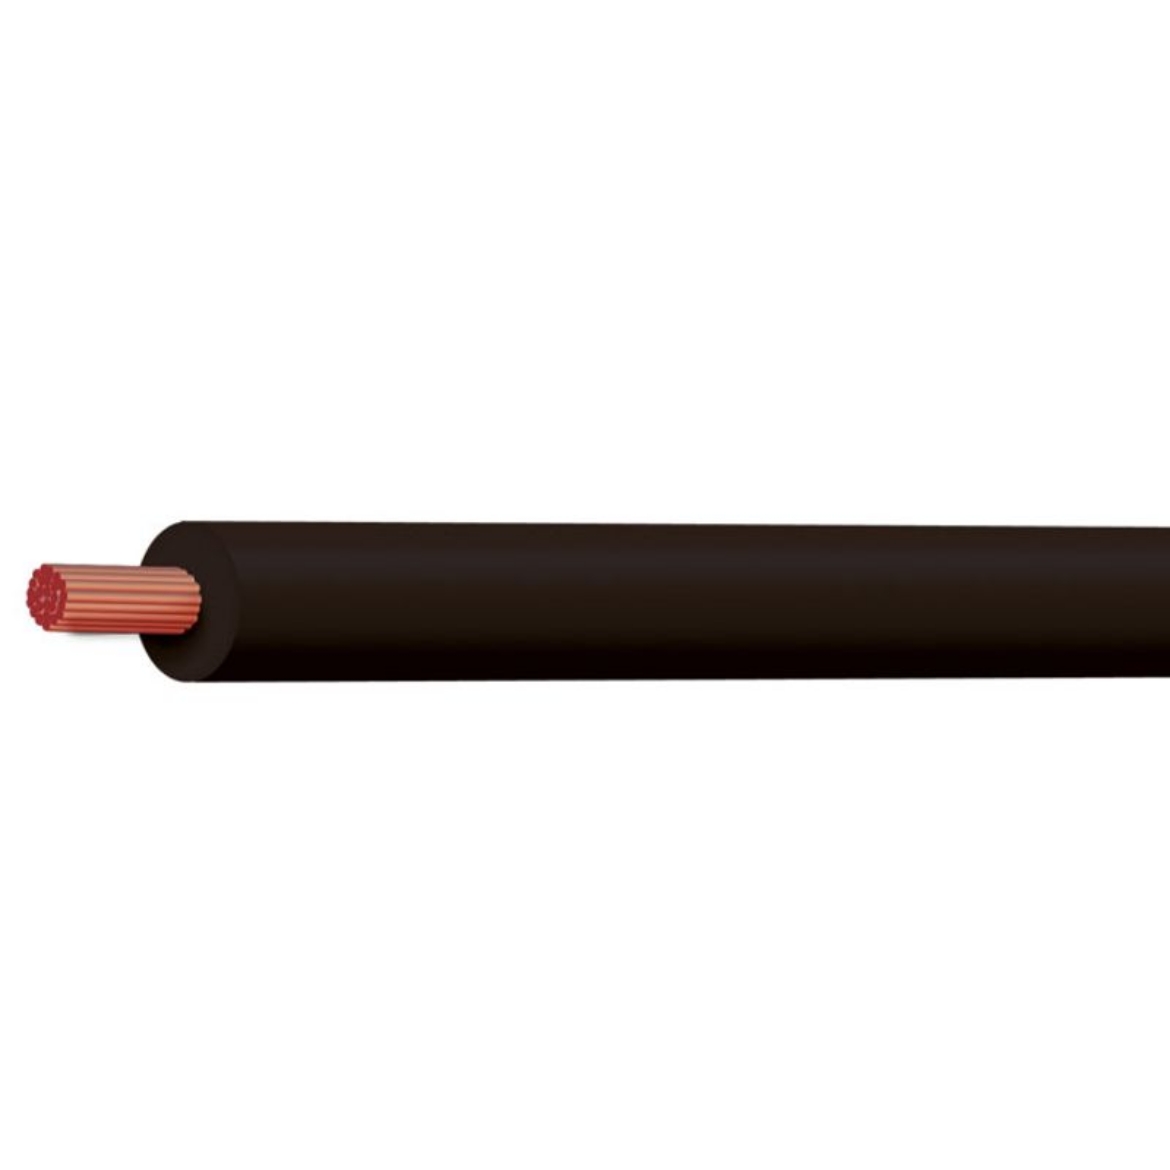 Picture of TYCAB SINGLE CORE CABLE BATTERY 6 B & S CROSS SECT 14MM SQ RATING 125A BLACK - 30M ROLL